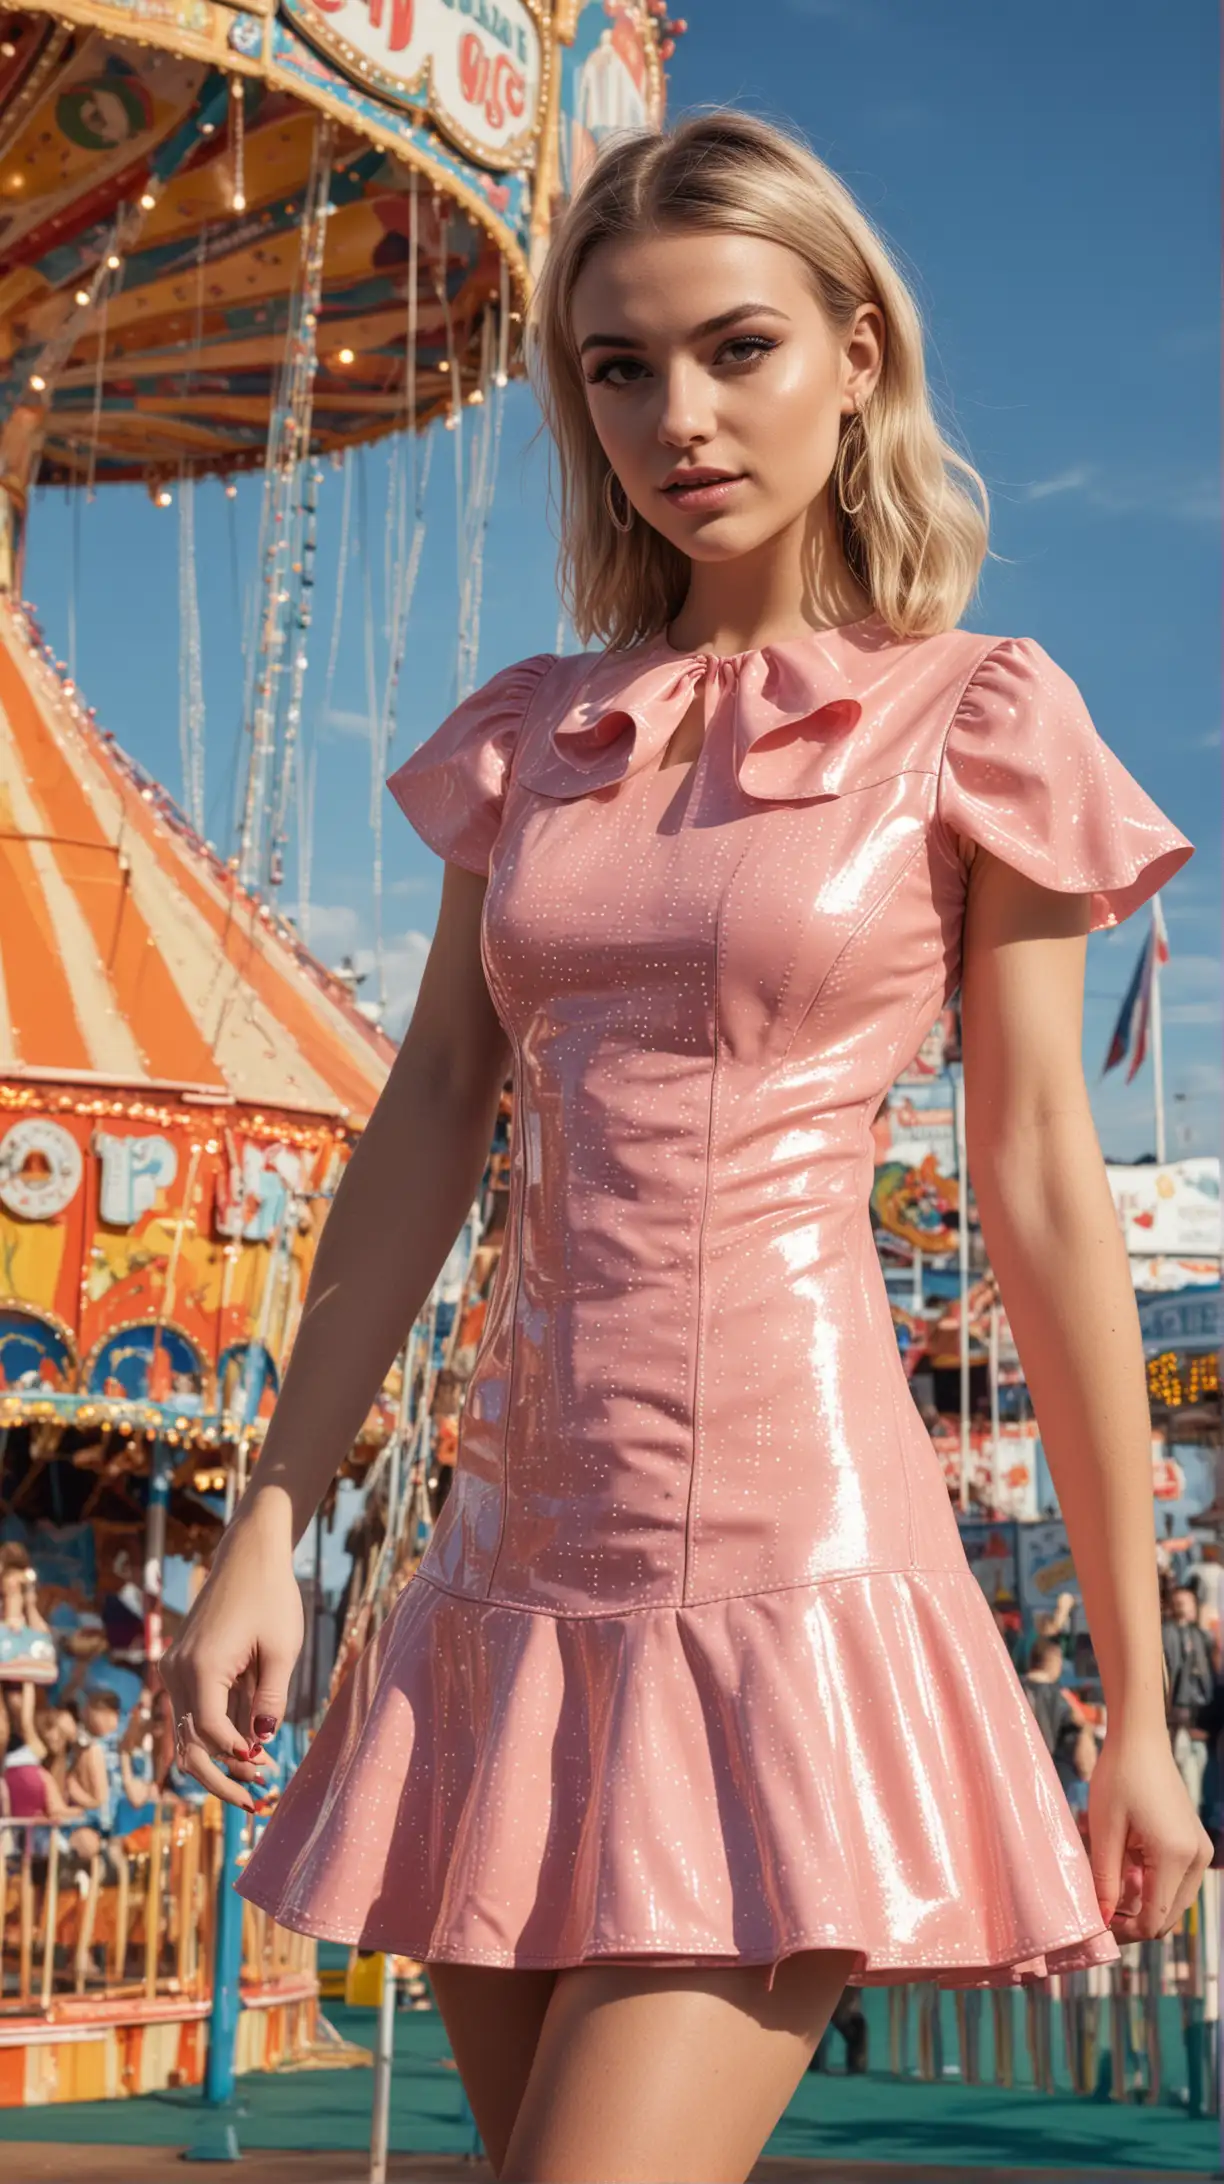 young woman at fairground wearing a short flared gloss pvc dress